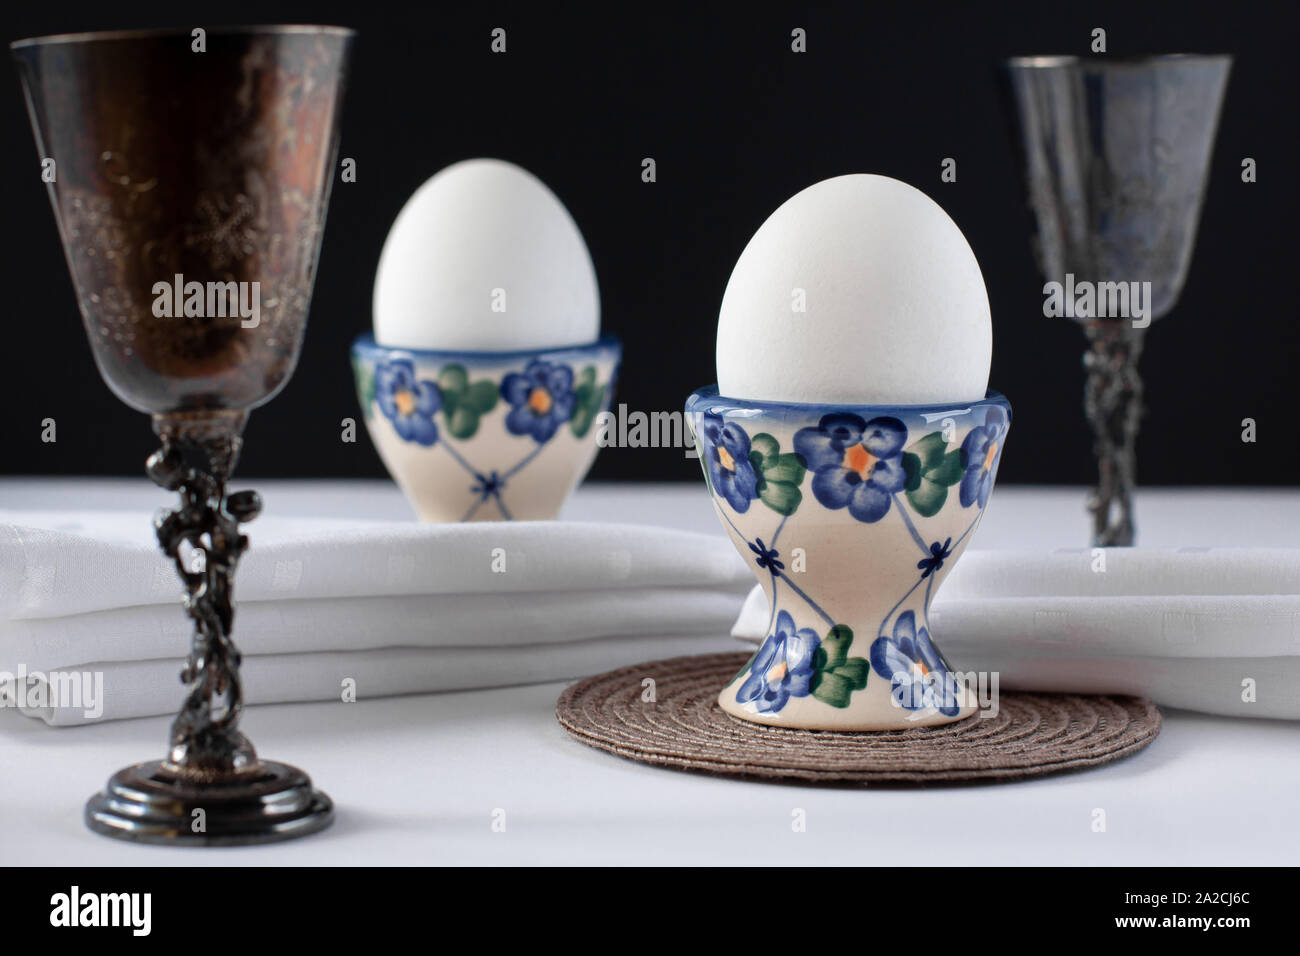 Still life of two white eggs in egg stands with white napkins near it and two sterling silver wine glasses. International world egg day concept Stock Photo